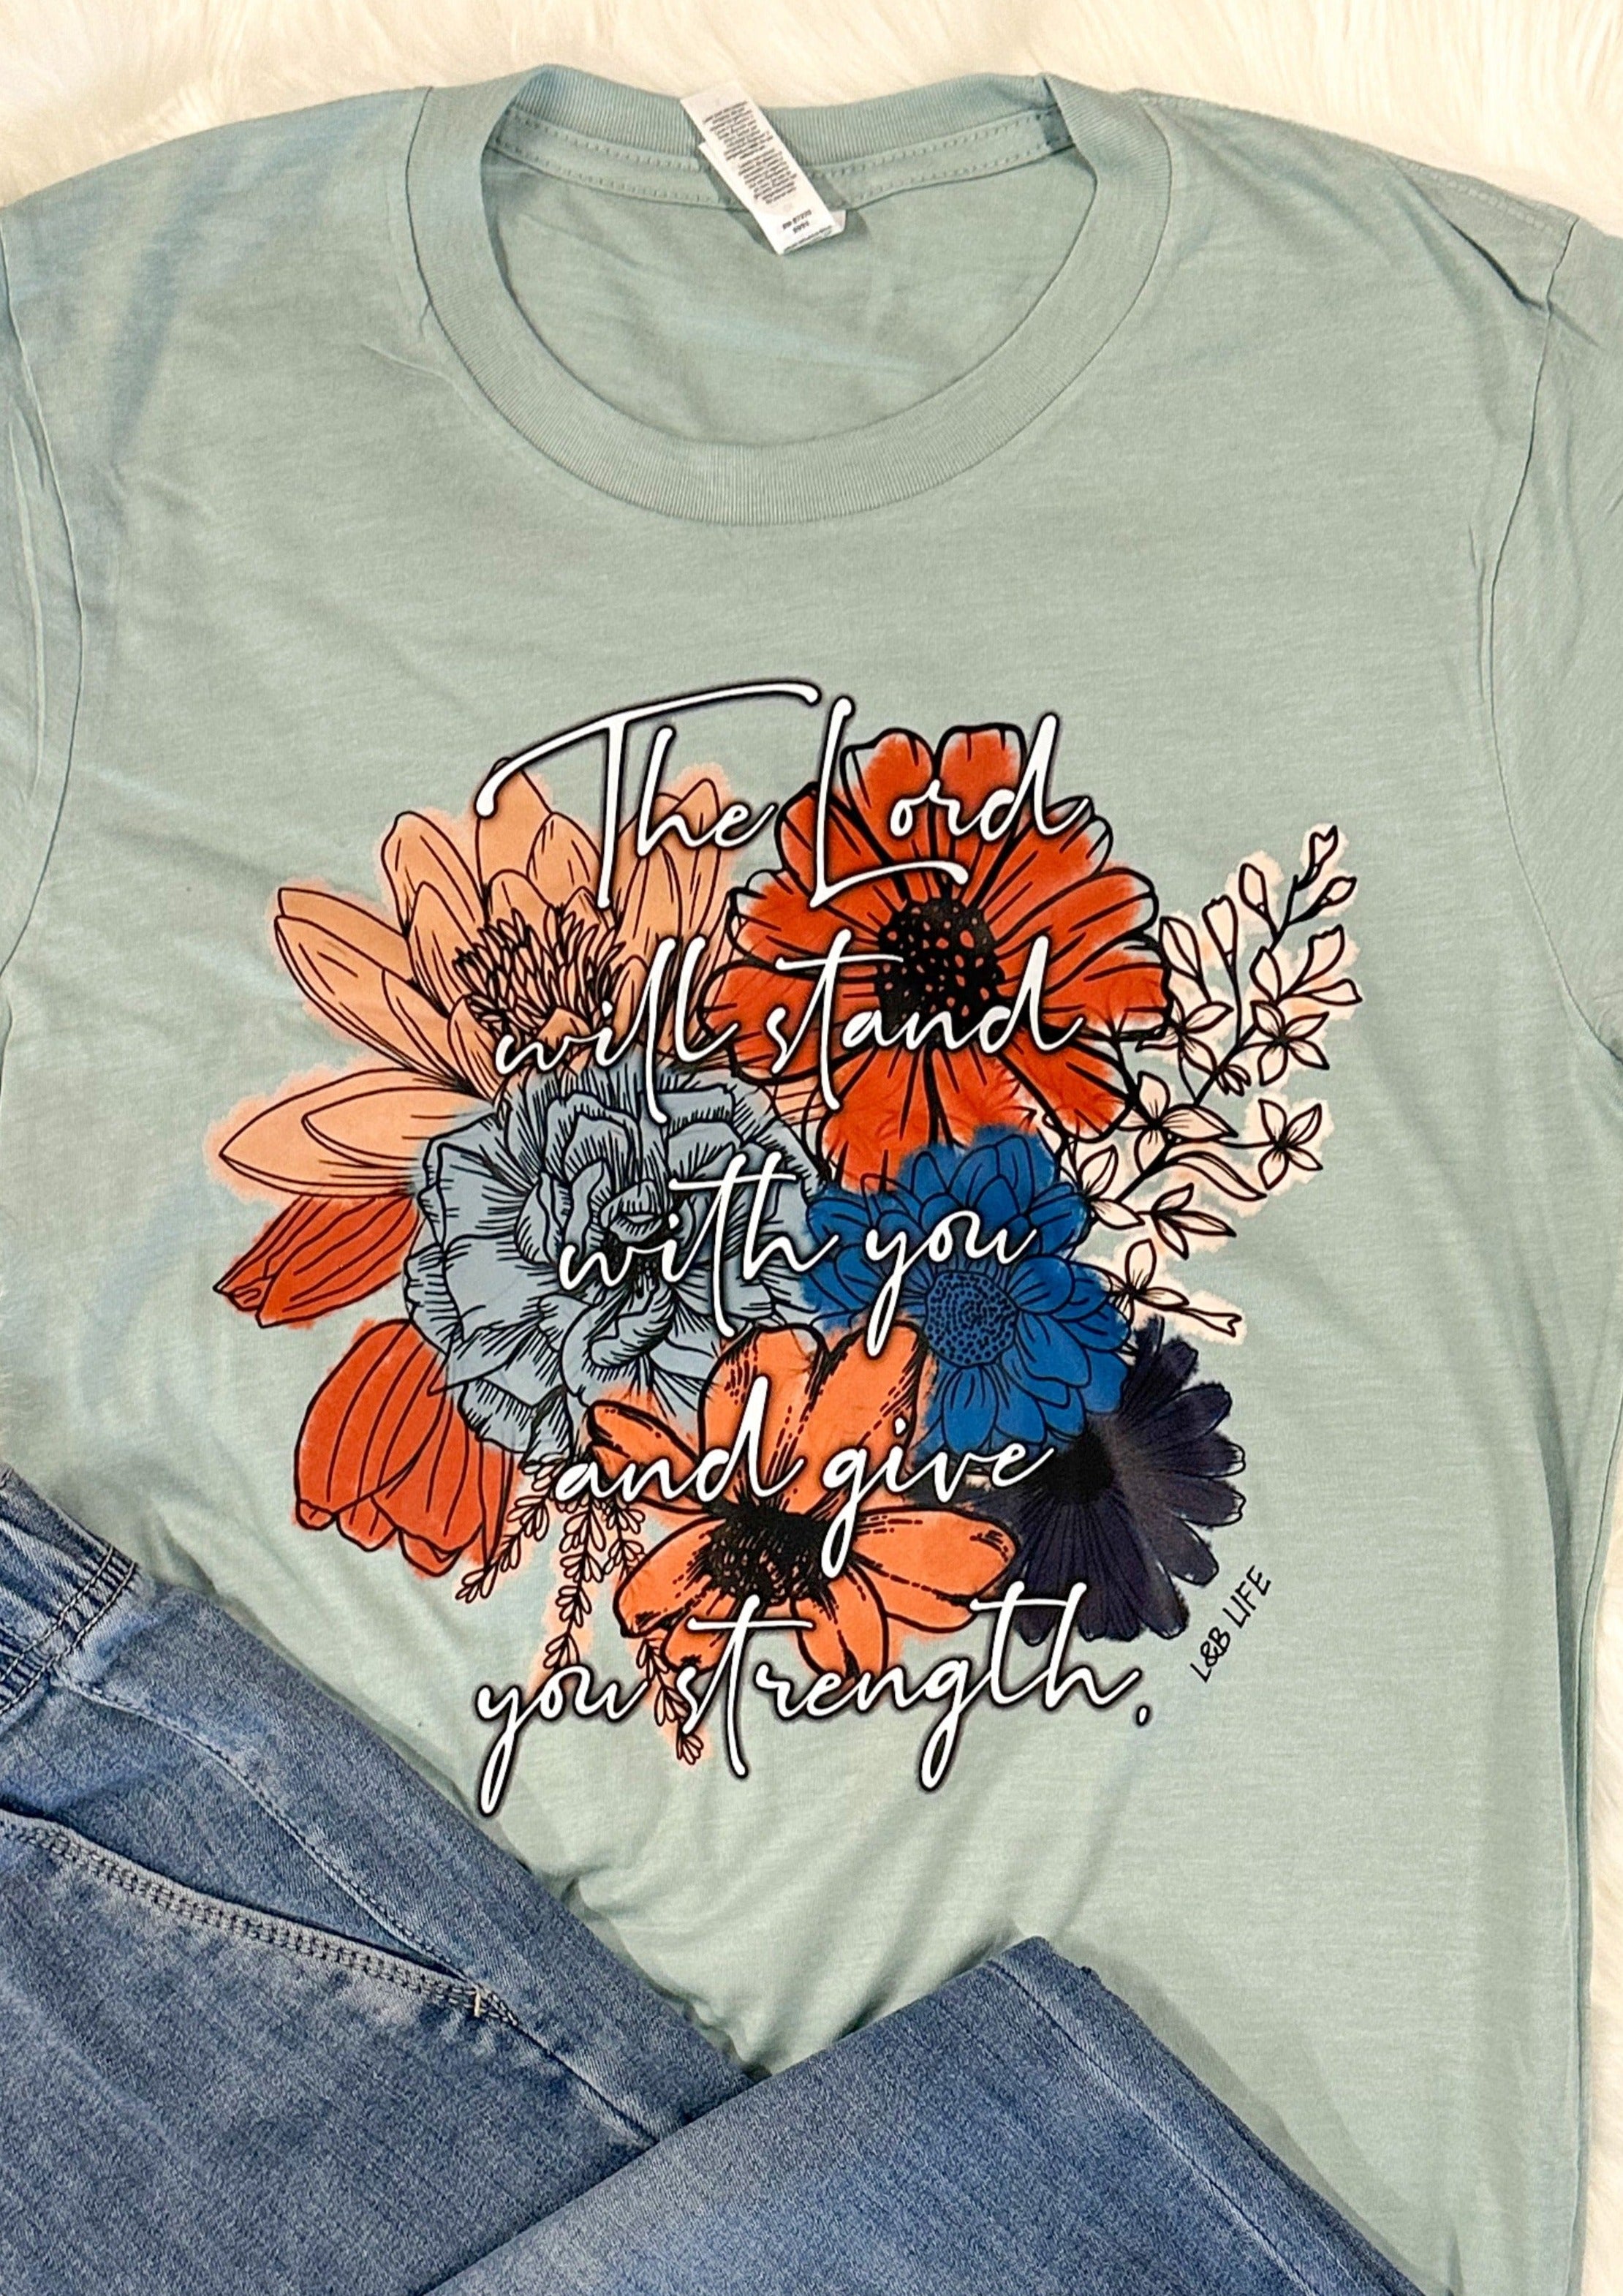 The Lord Will Stand with you andgive you strength Tee Shirt - Dusty Blue color with multi color flowers on the front and white writing